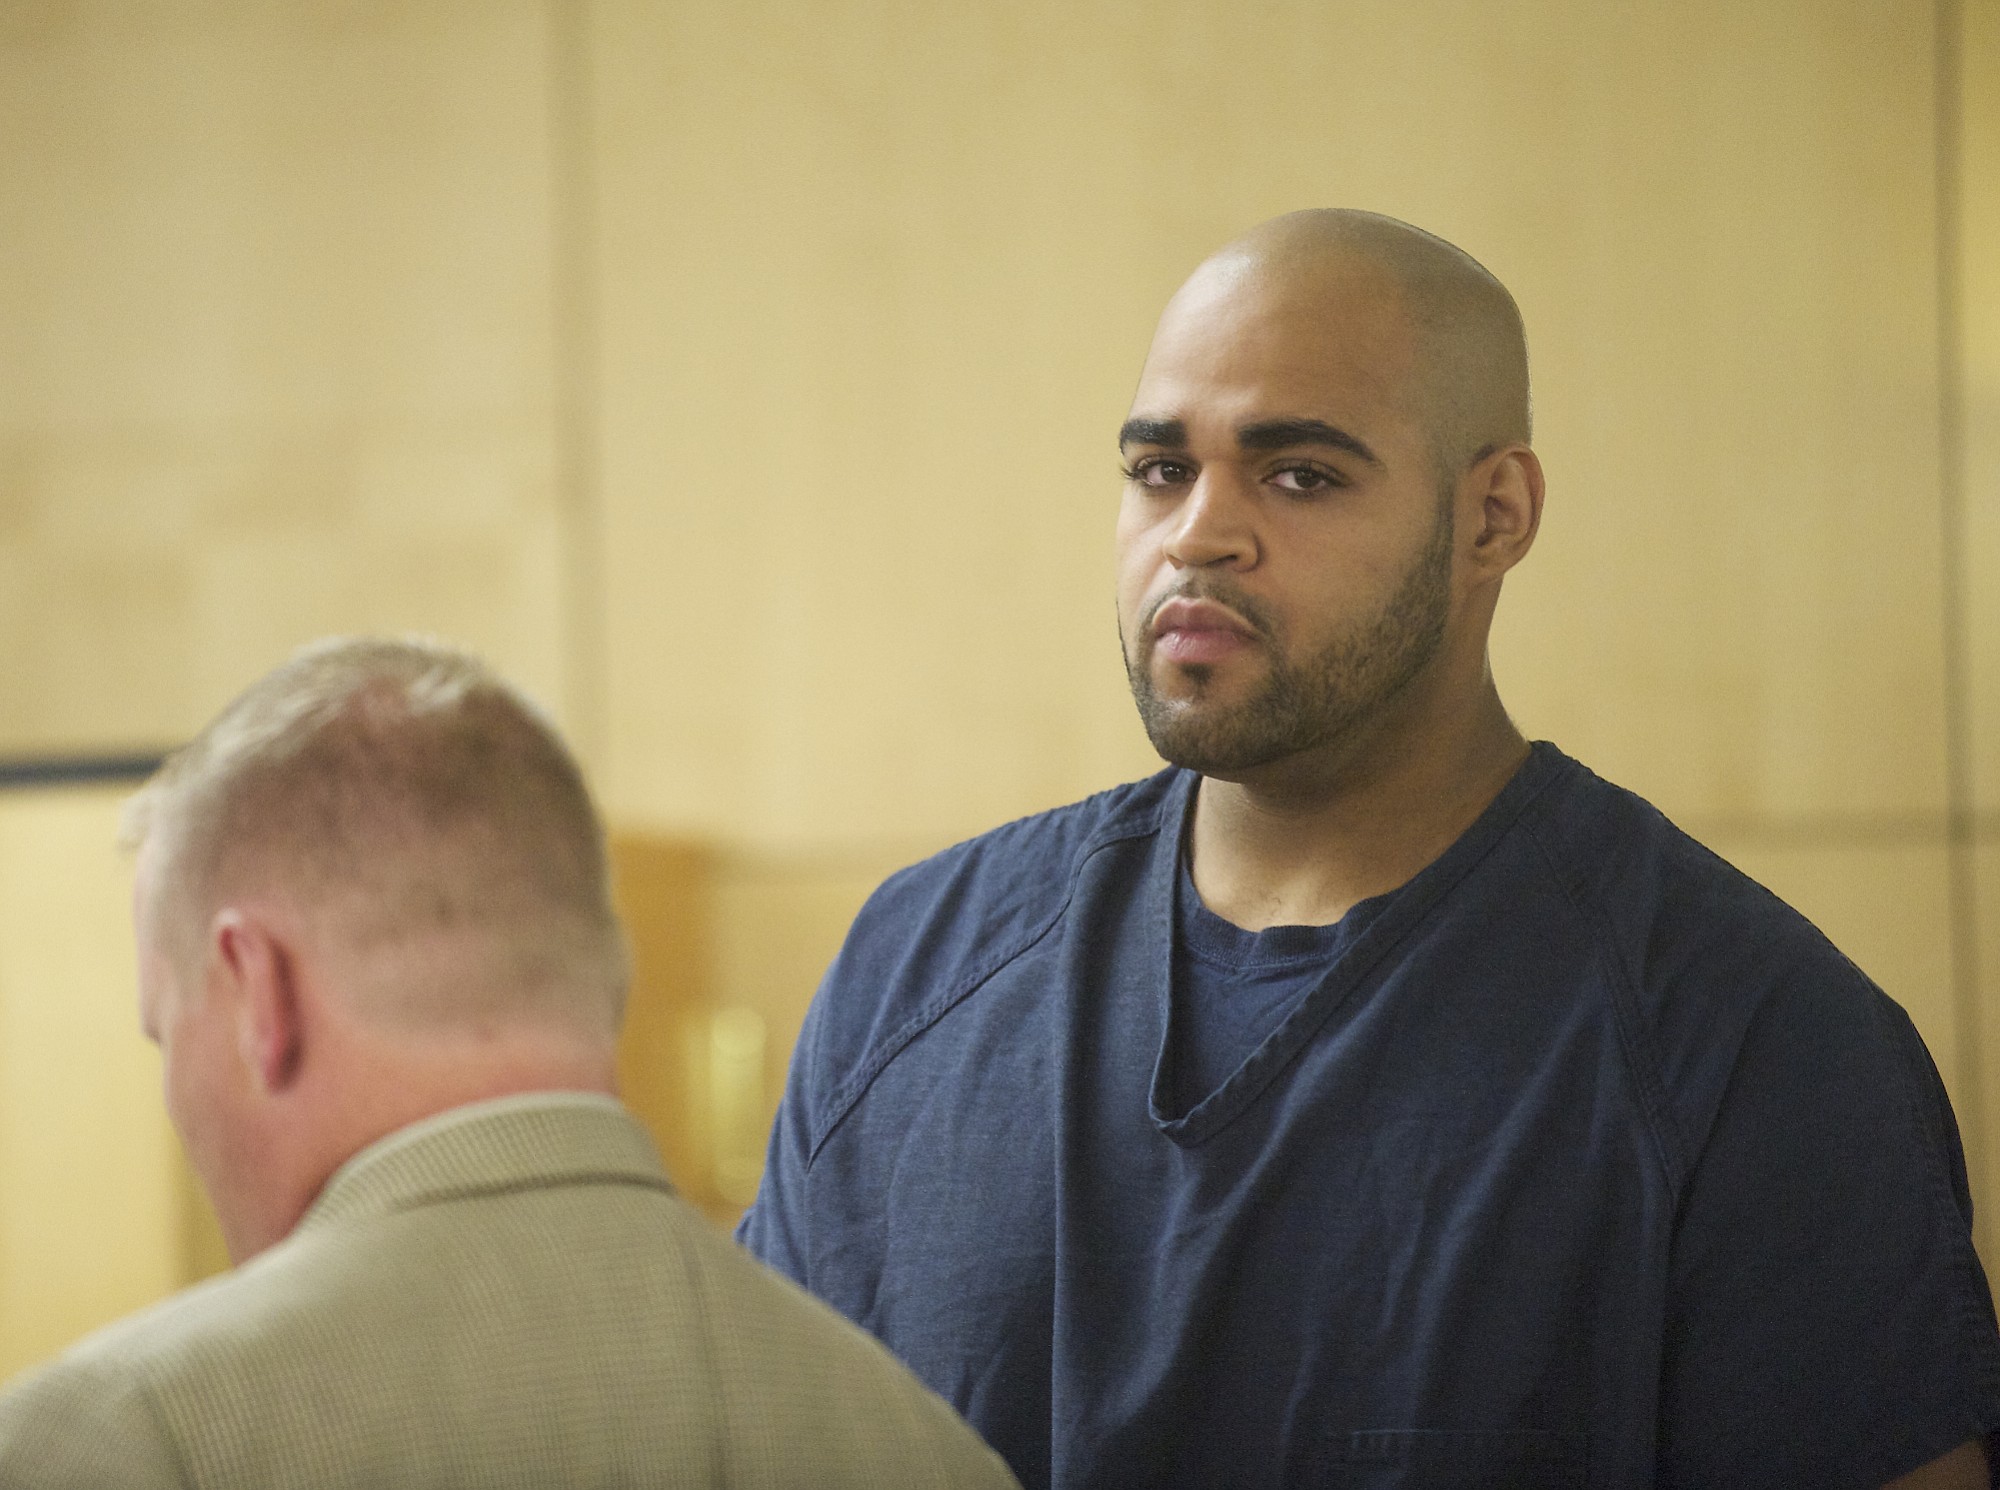 Columbian files
Antonio E. Cellestine pleads guilty in Clark County Superior Court on Aug. 7, 2013, to taking a vehicle without permission and eluding police. Cellestine went to prison for the hit-and-run death of Hudson's Bay High School teacher Gordon Patterson in 2009.